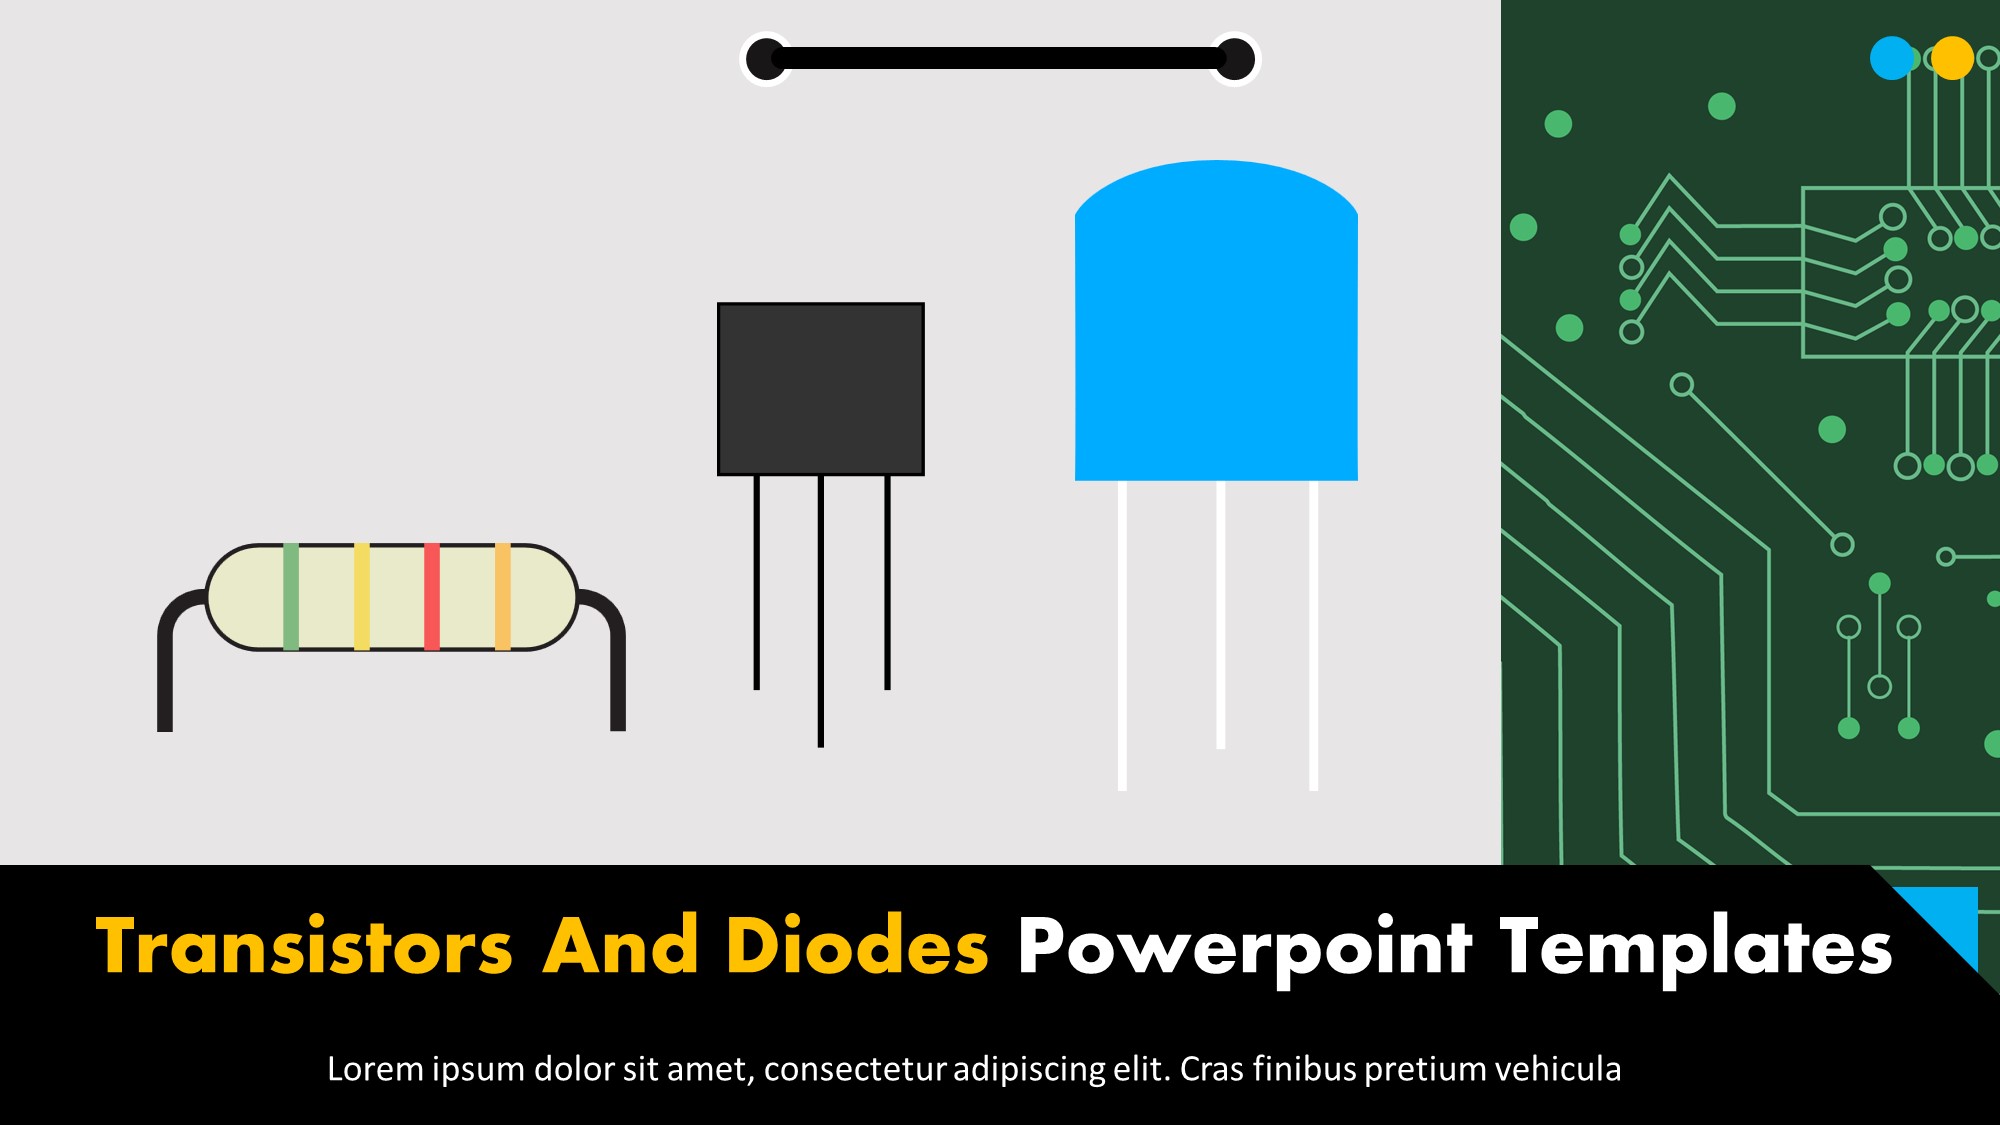 Transistors And Diodes Powerpoint Templates